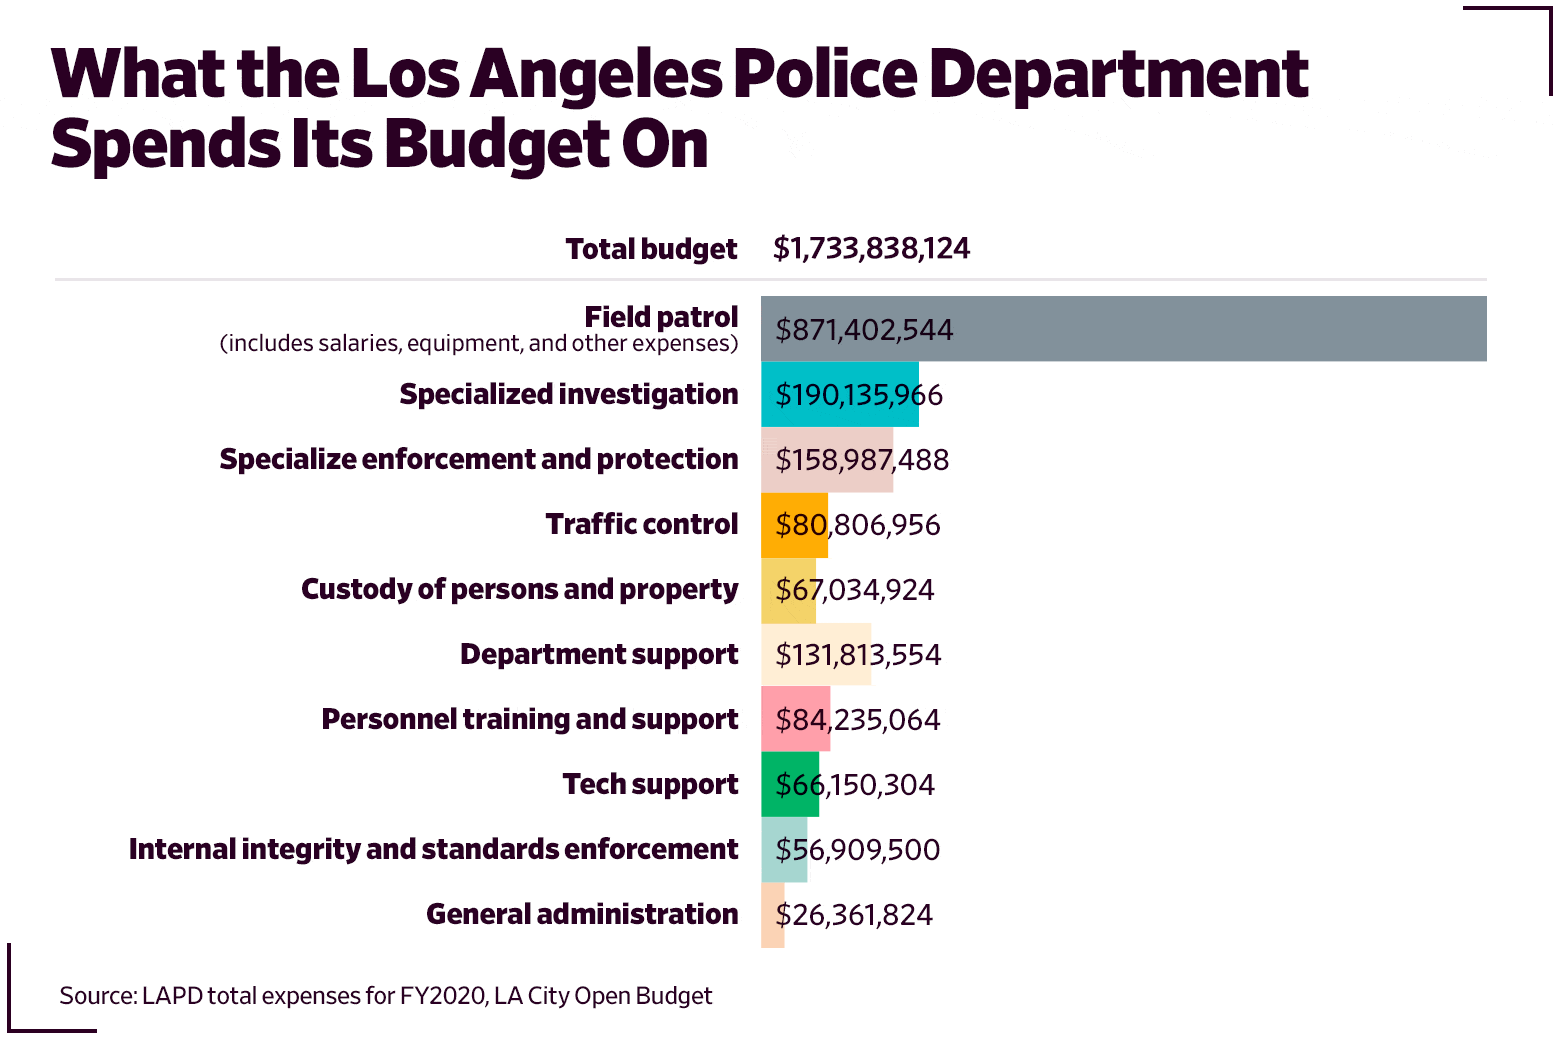 Bar graph showing what the LAPD spends its budget on